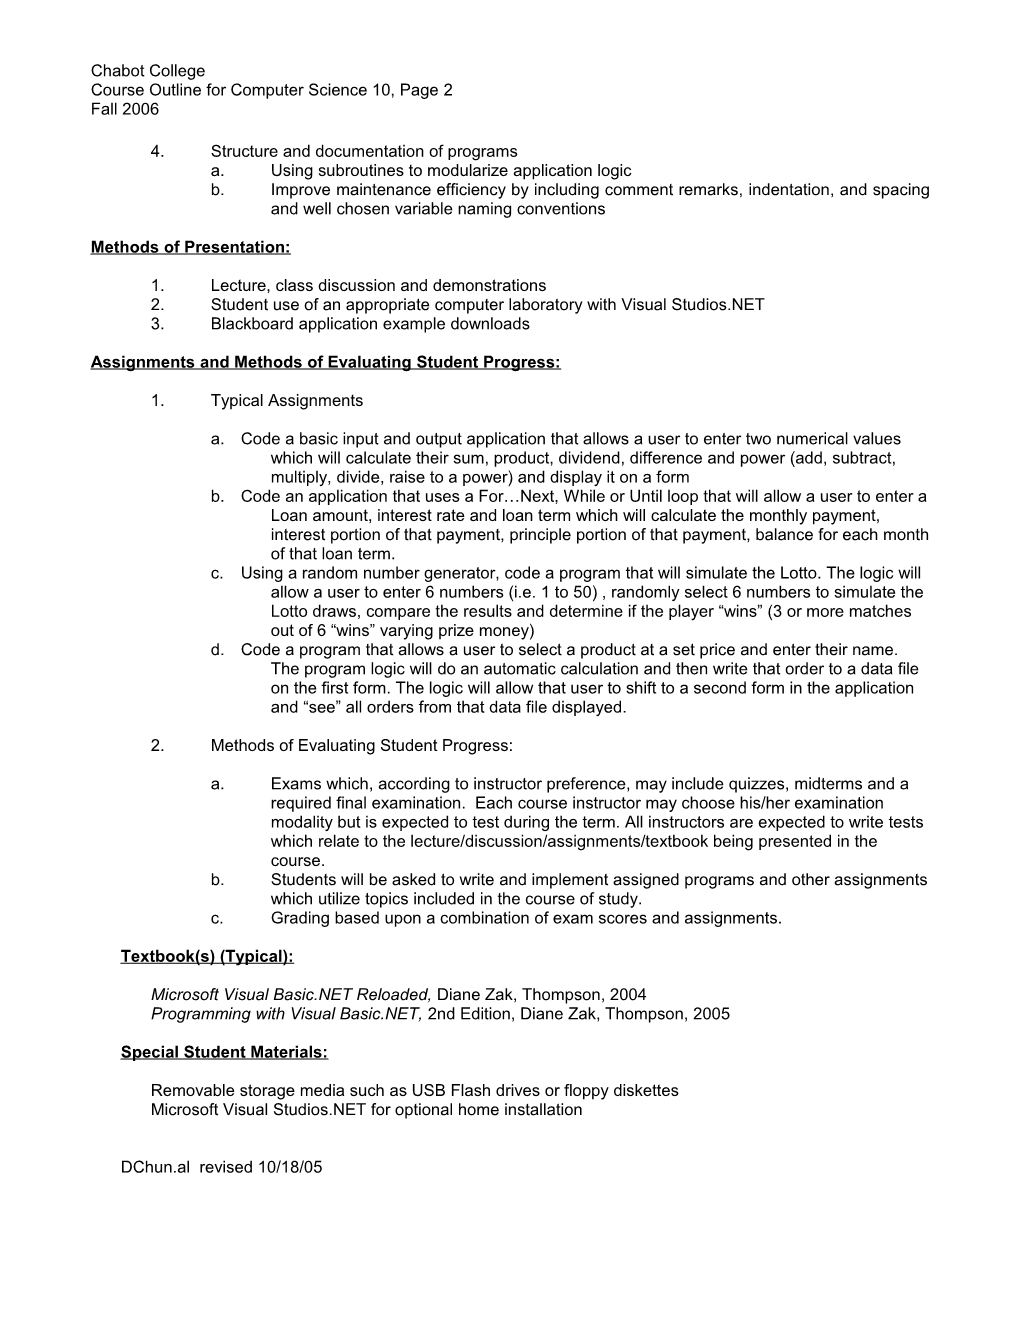 Course Outline for Computer Science 10, Page 2 s1